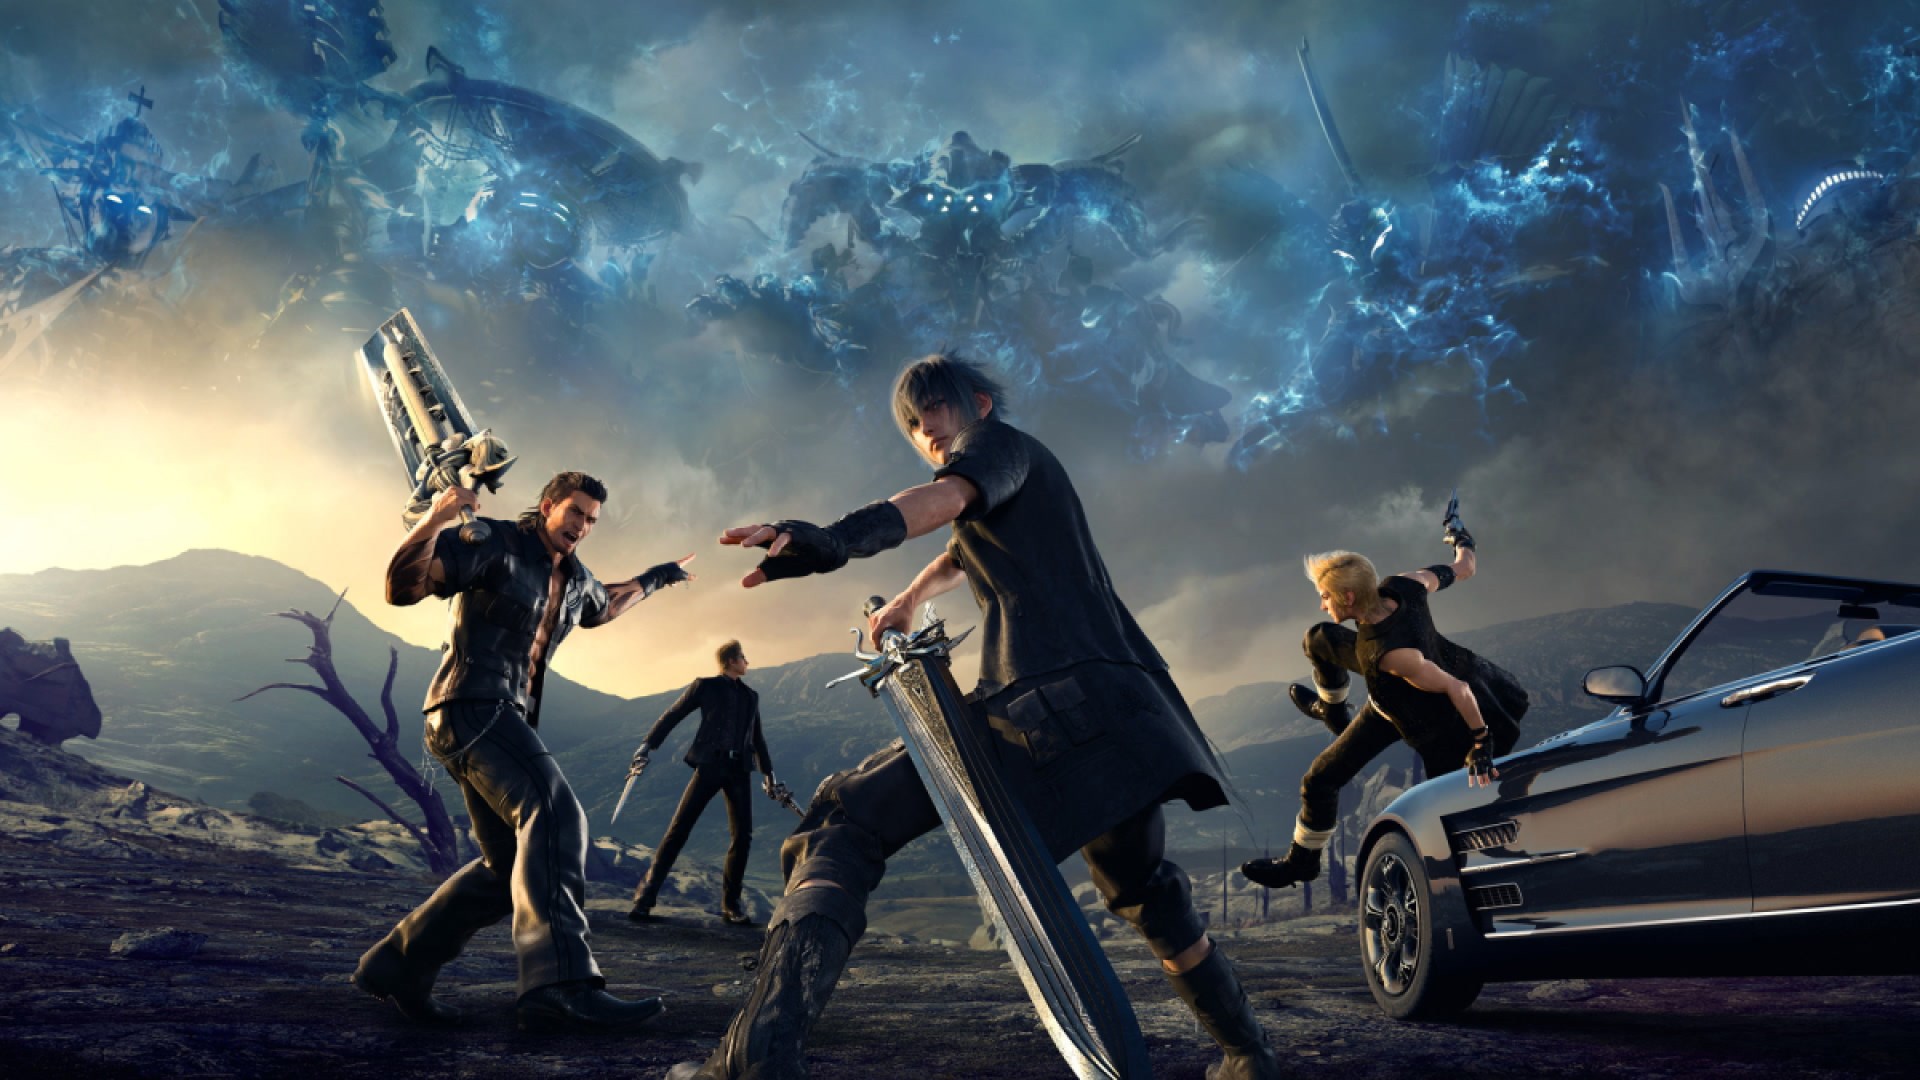 Noctis and friends from FFXV